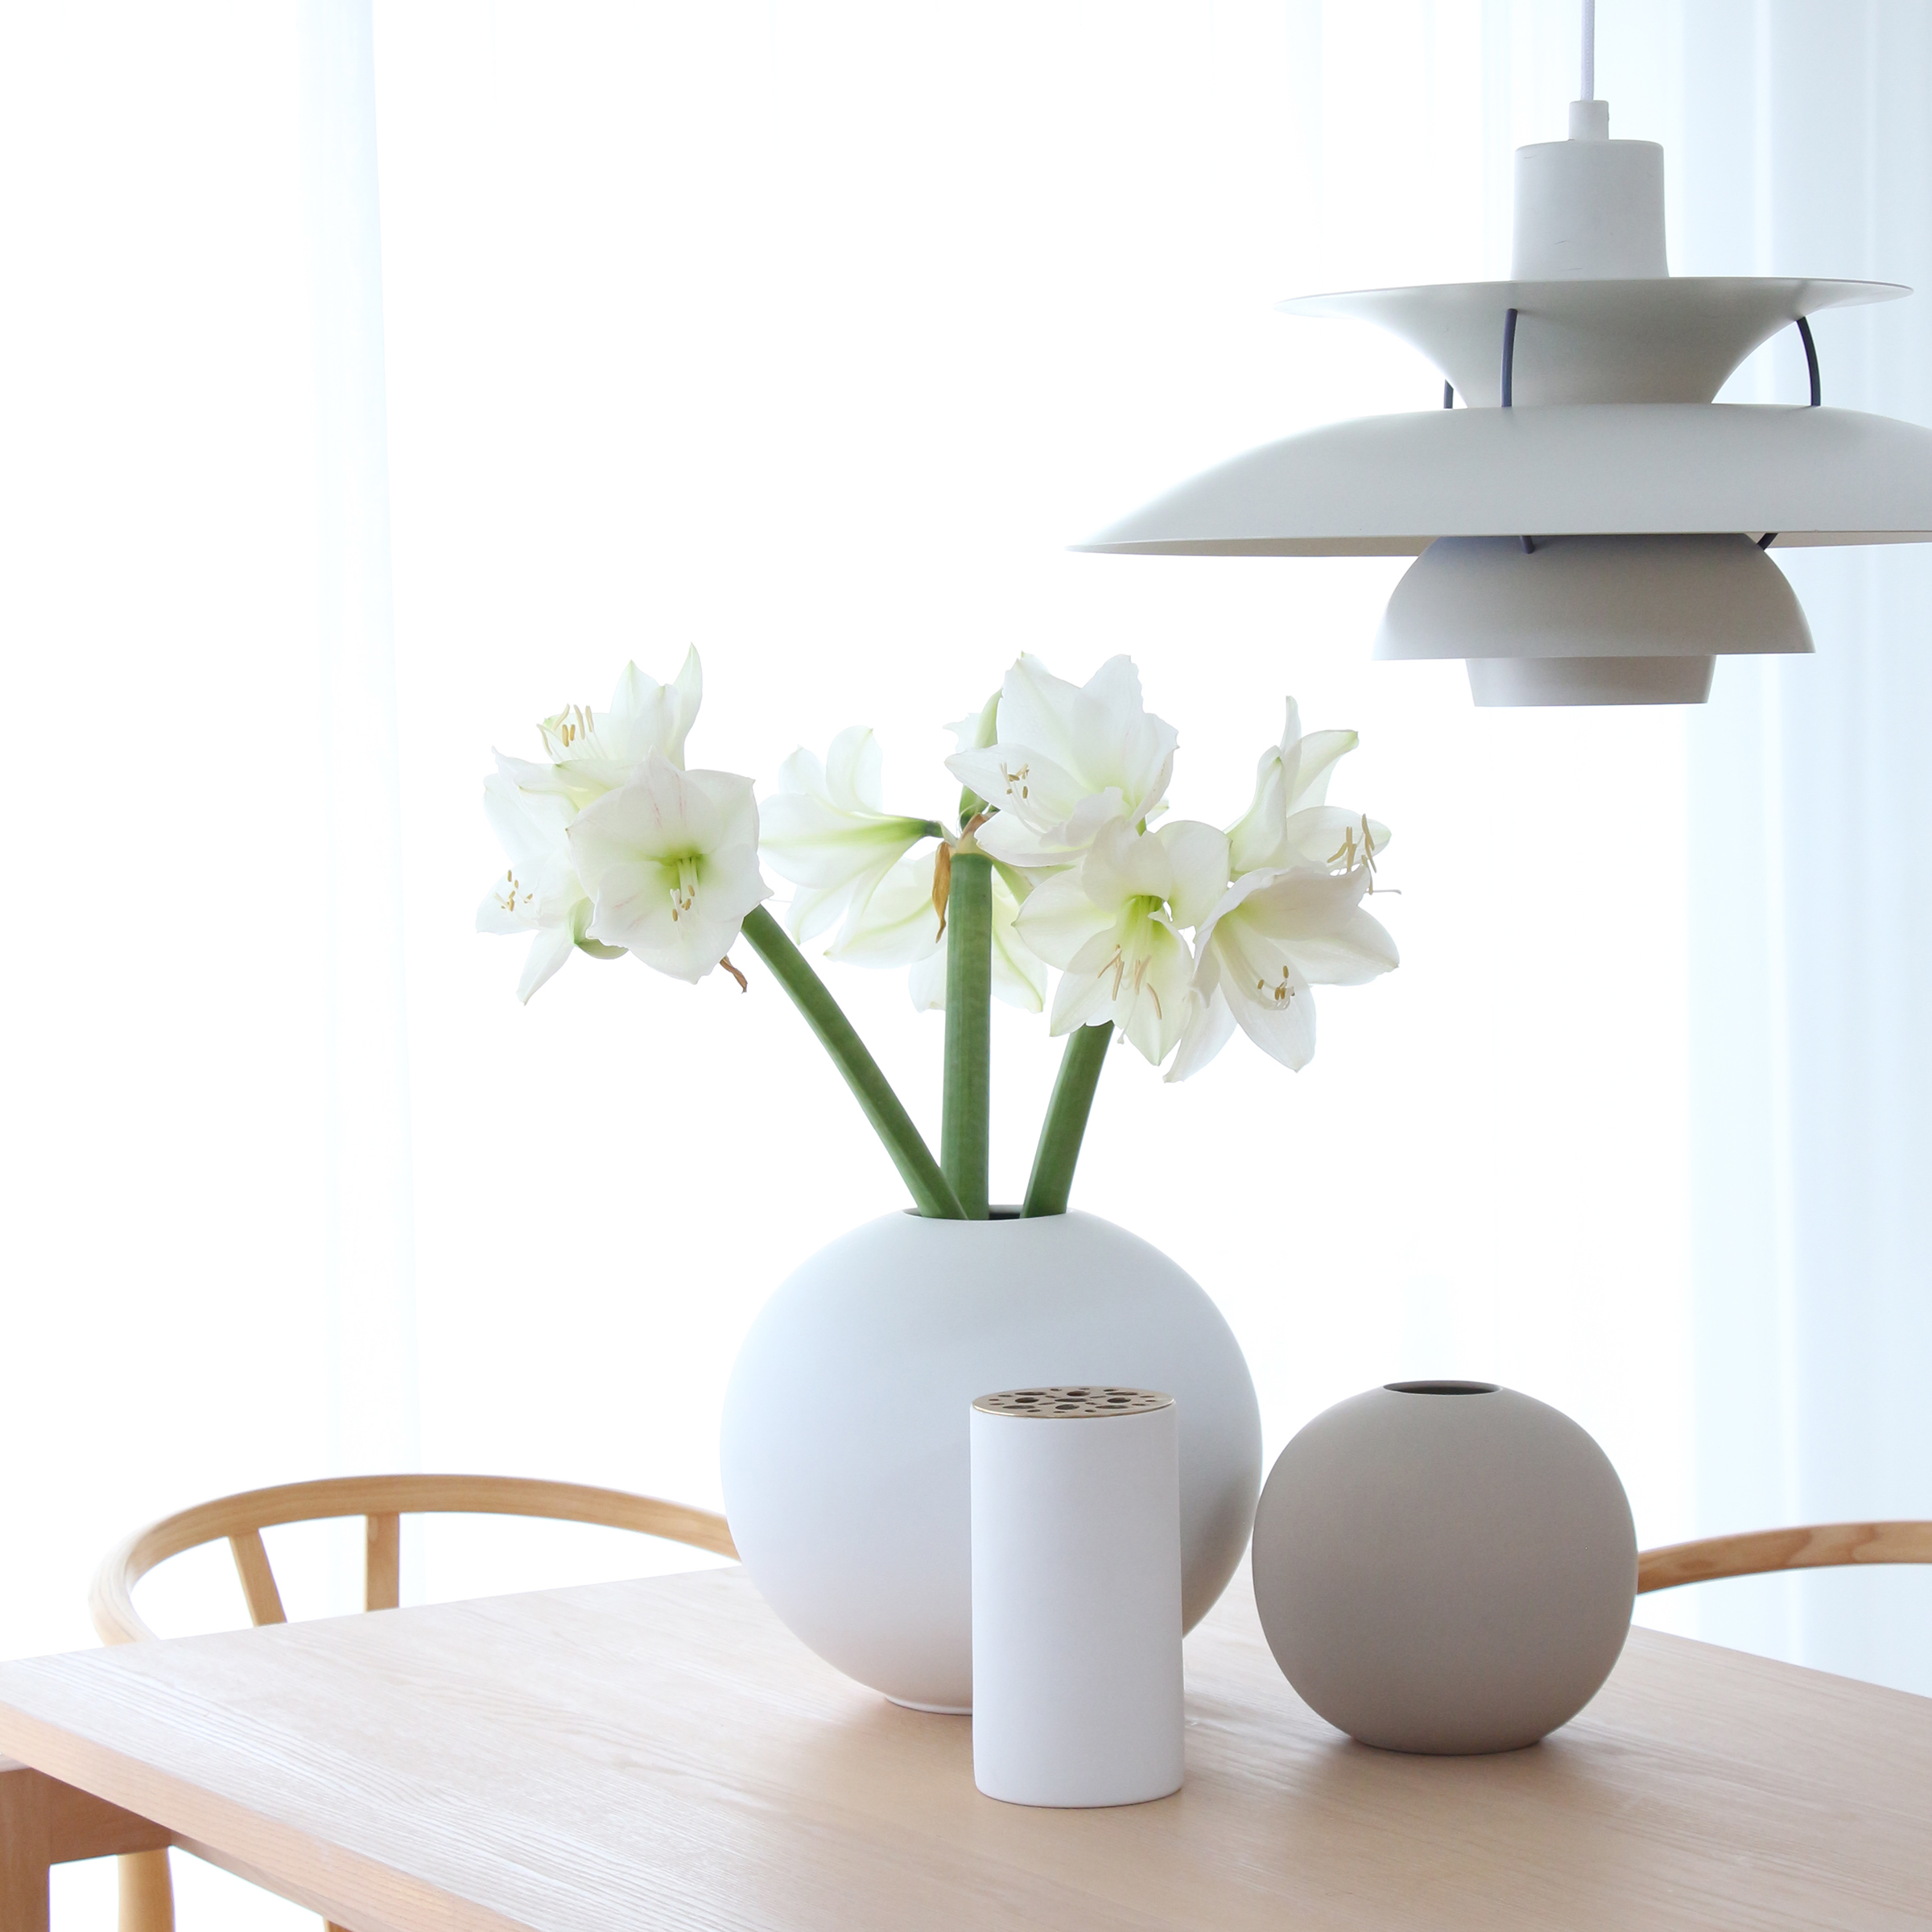 Ball vase white from Cooee Design - NordicNest.com